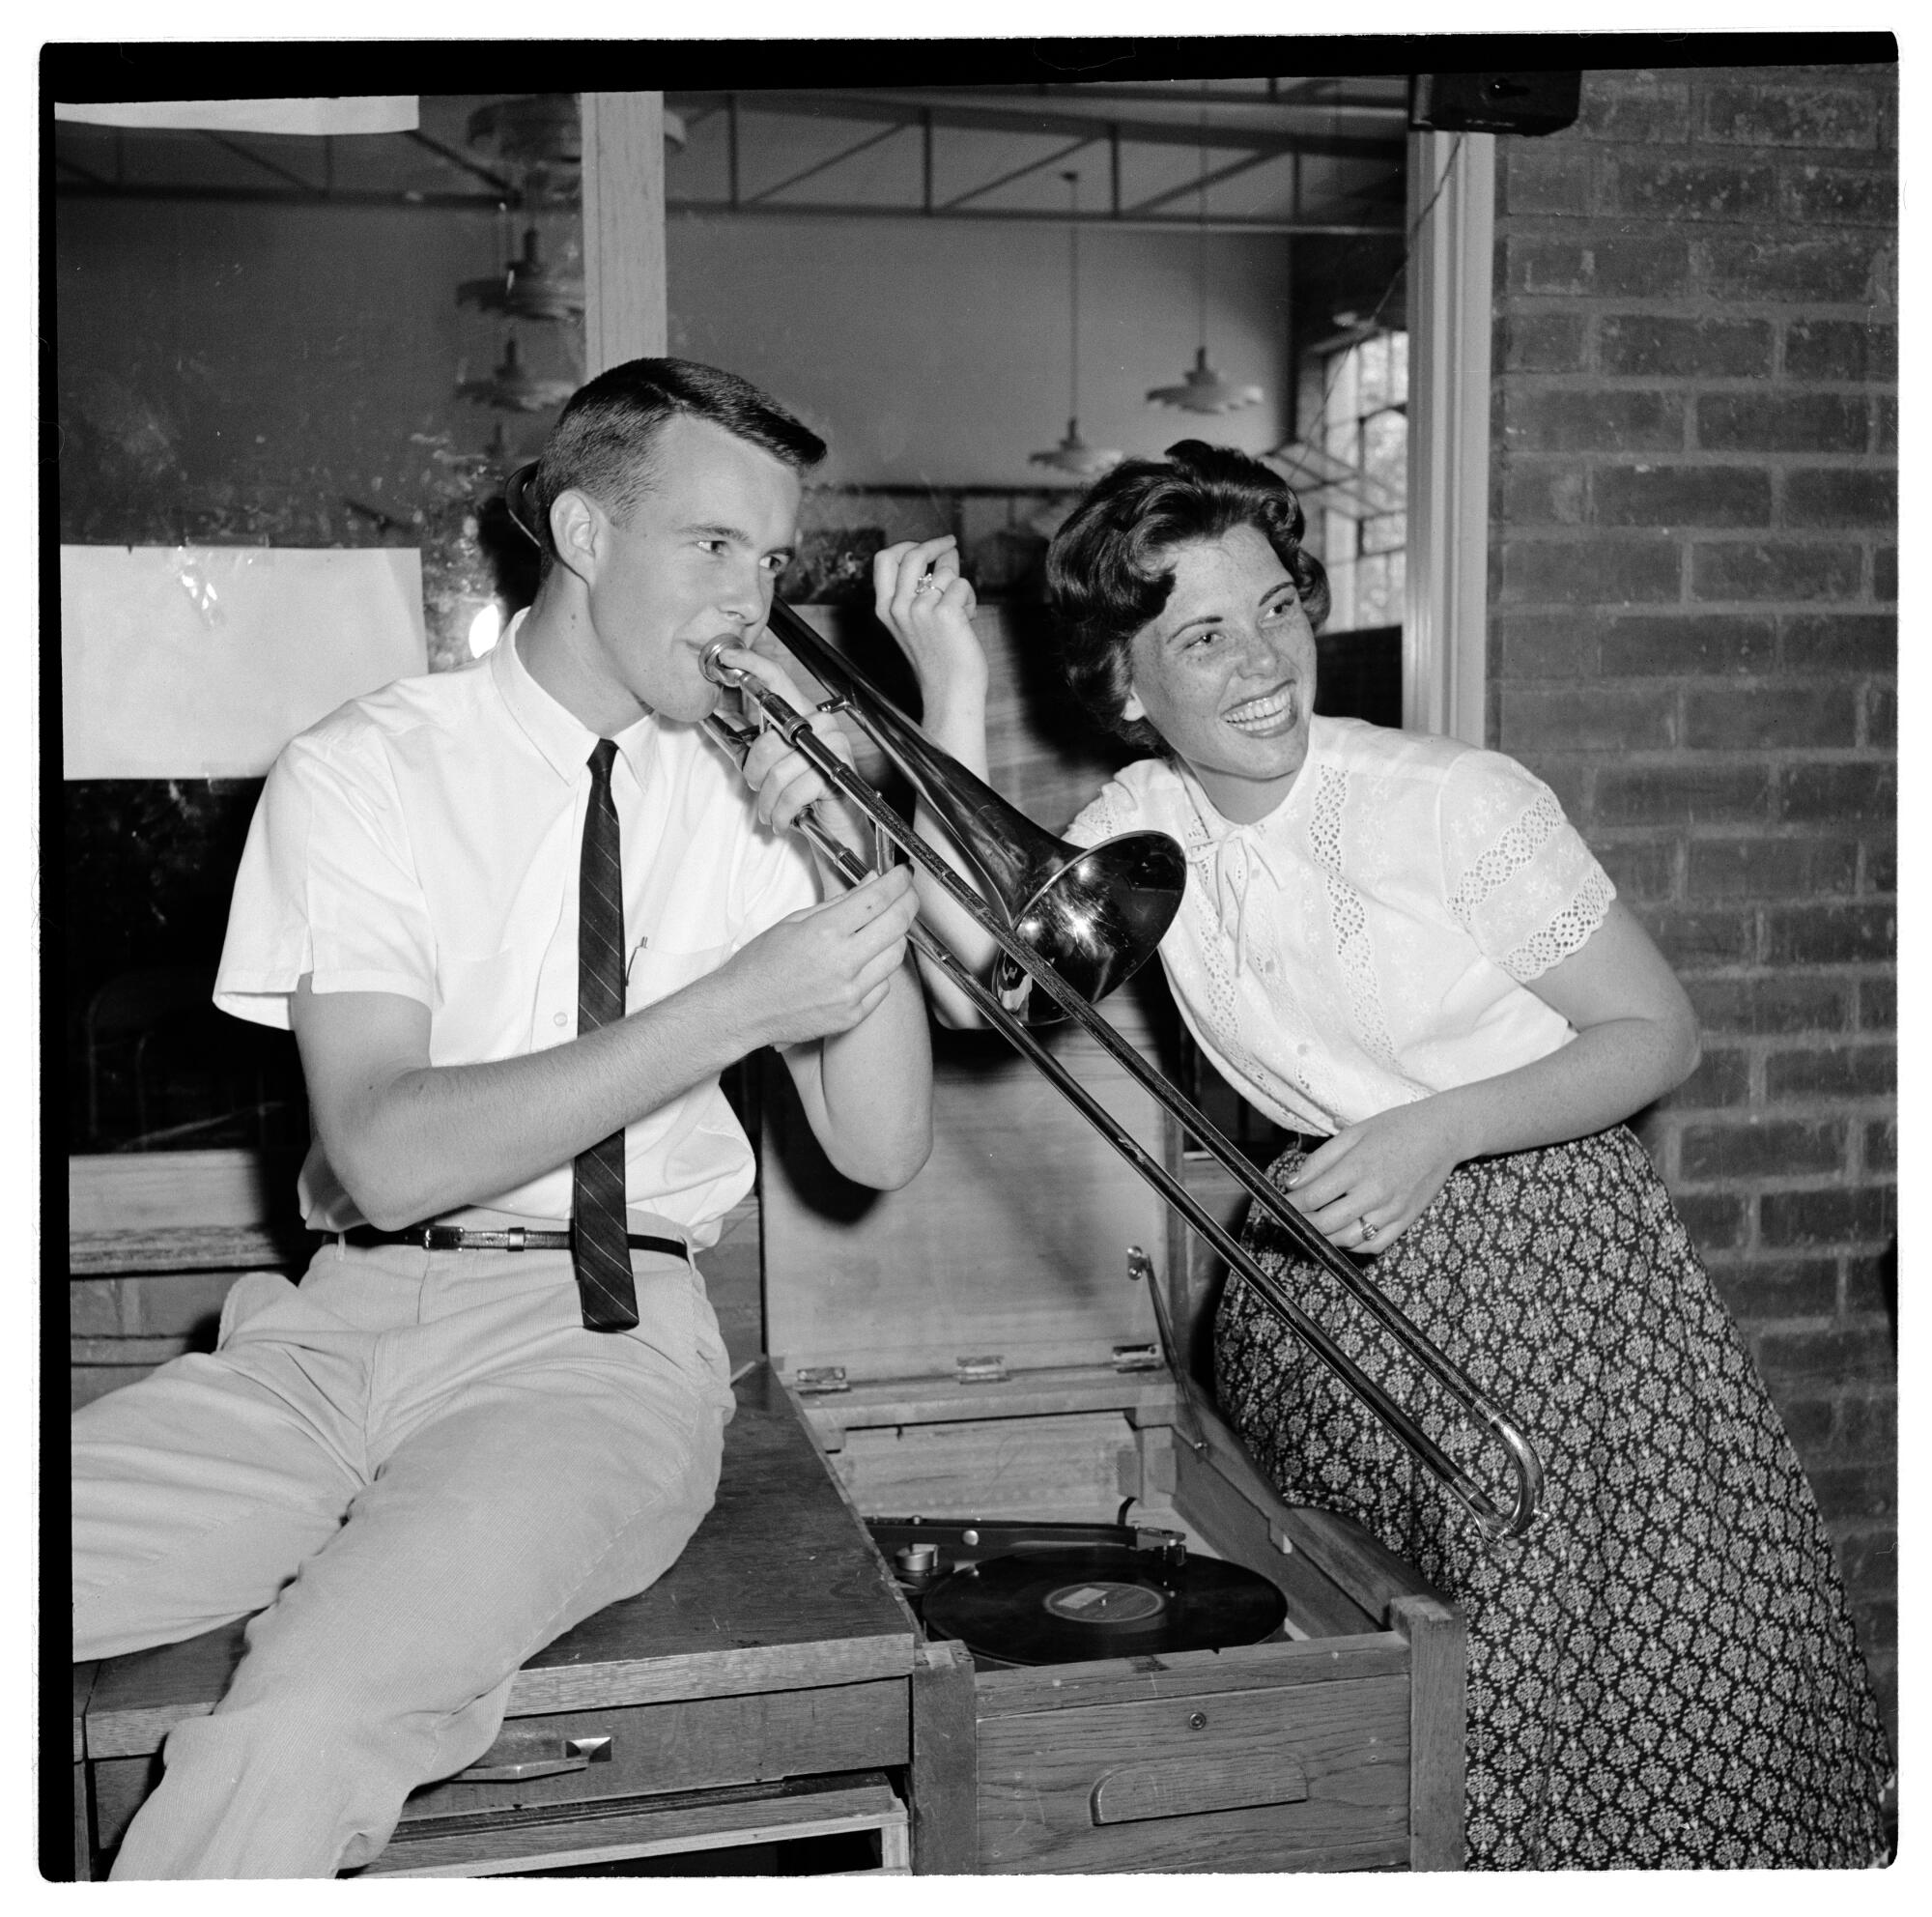 A young white man plays the trombone while a young white woman sitting next to him snaps her fingers.